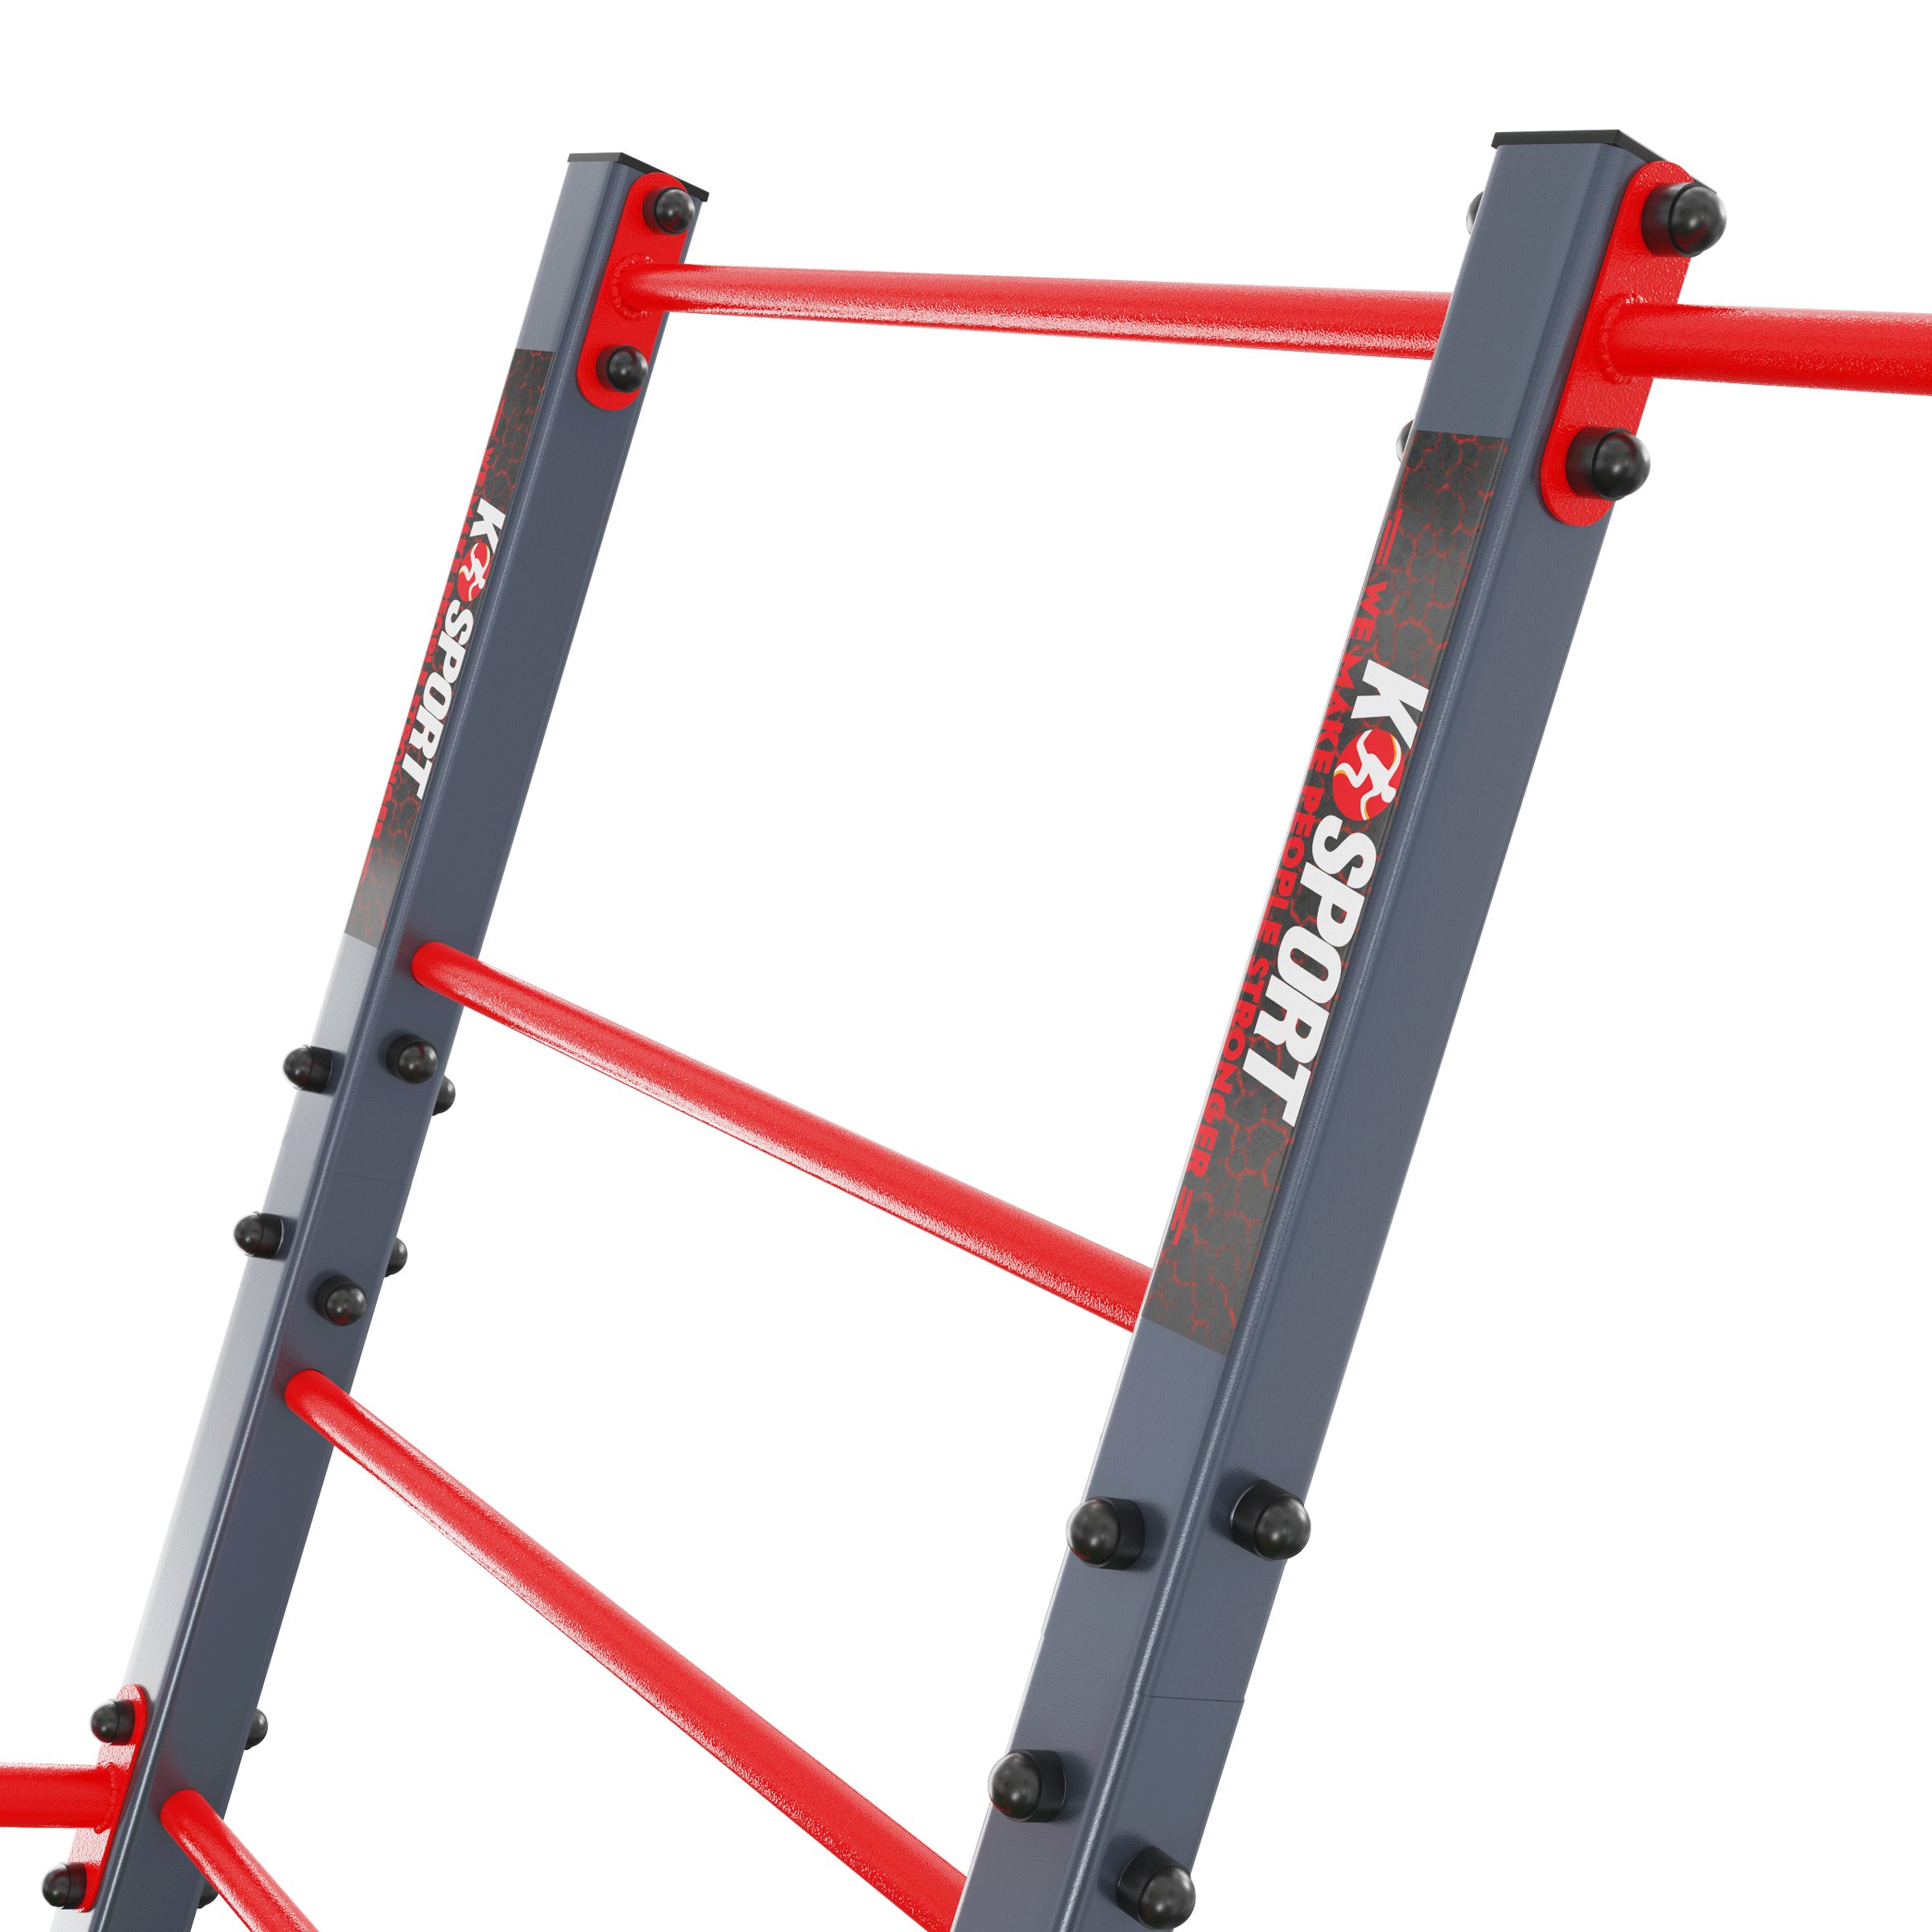 K-sport Outdoor Calisthenics Equipment With Wall Bars And Hanging